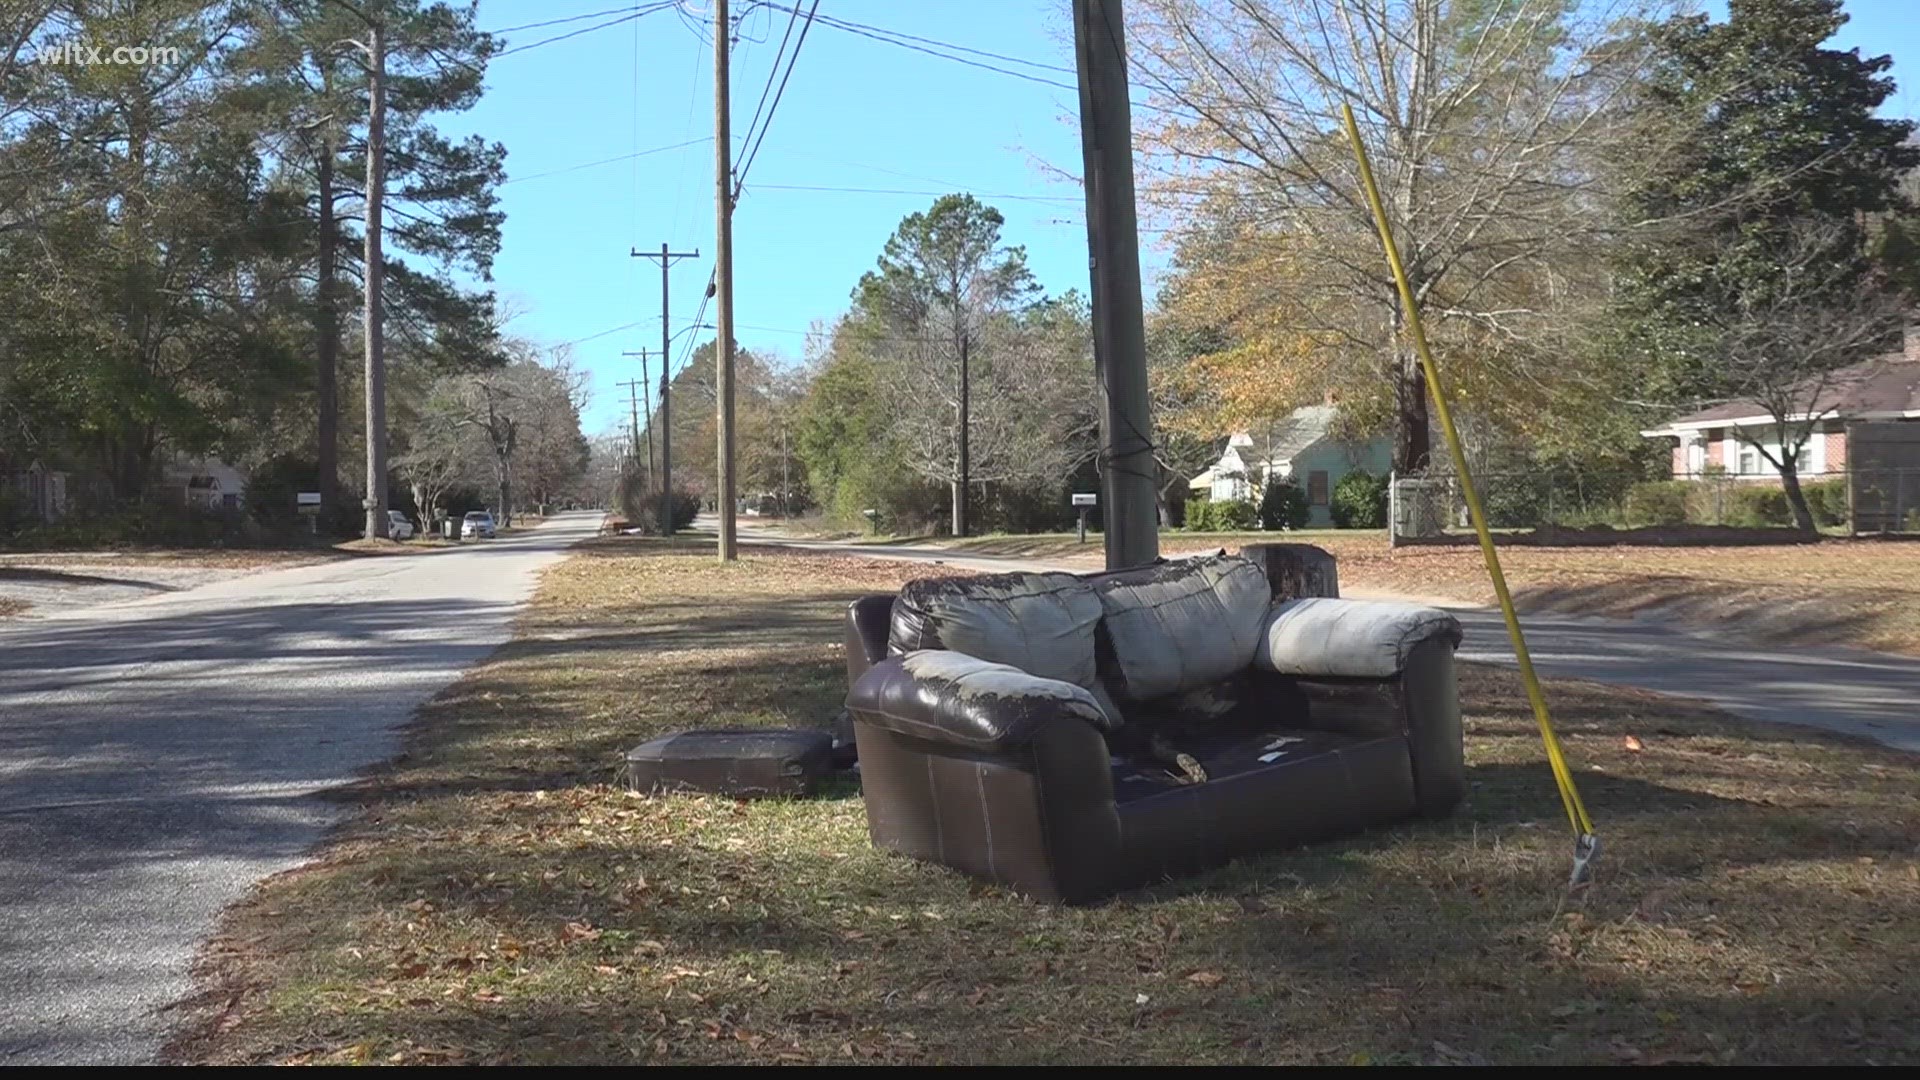 A neighborhood in Sumter is getting upset as people are dumping trash in the area.